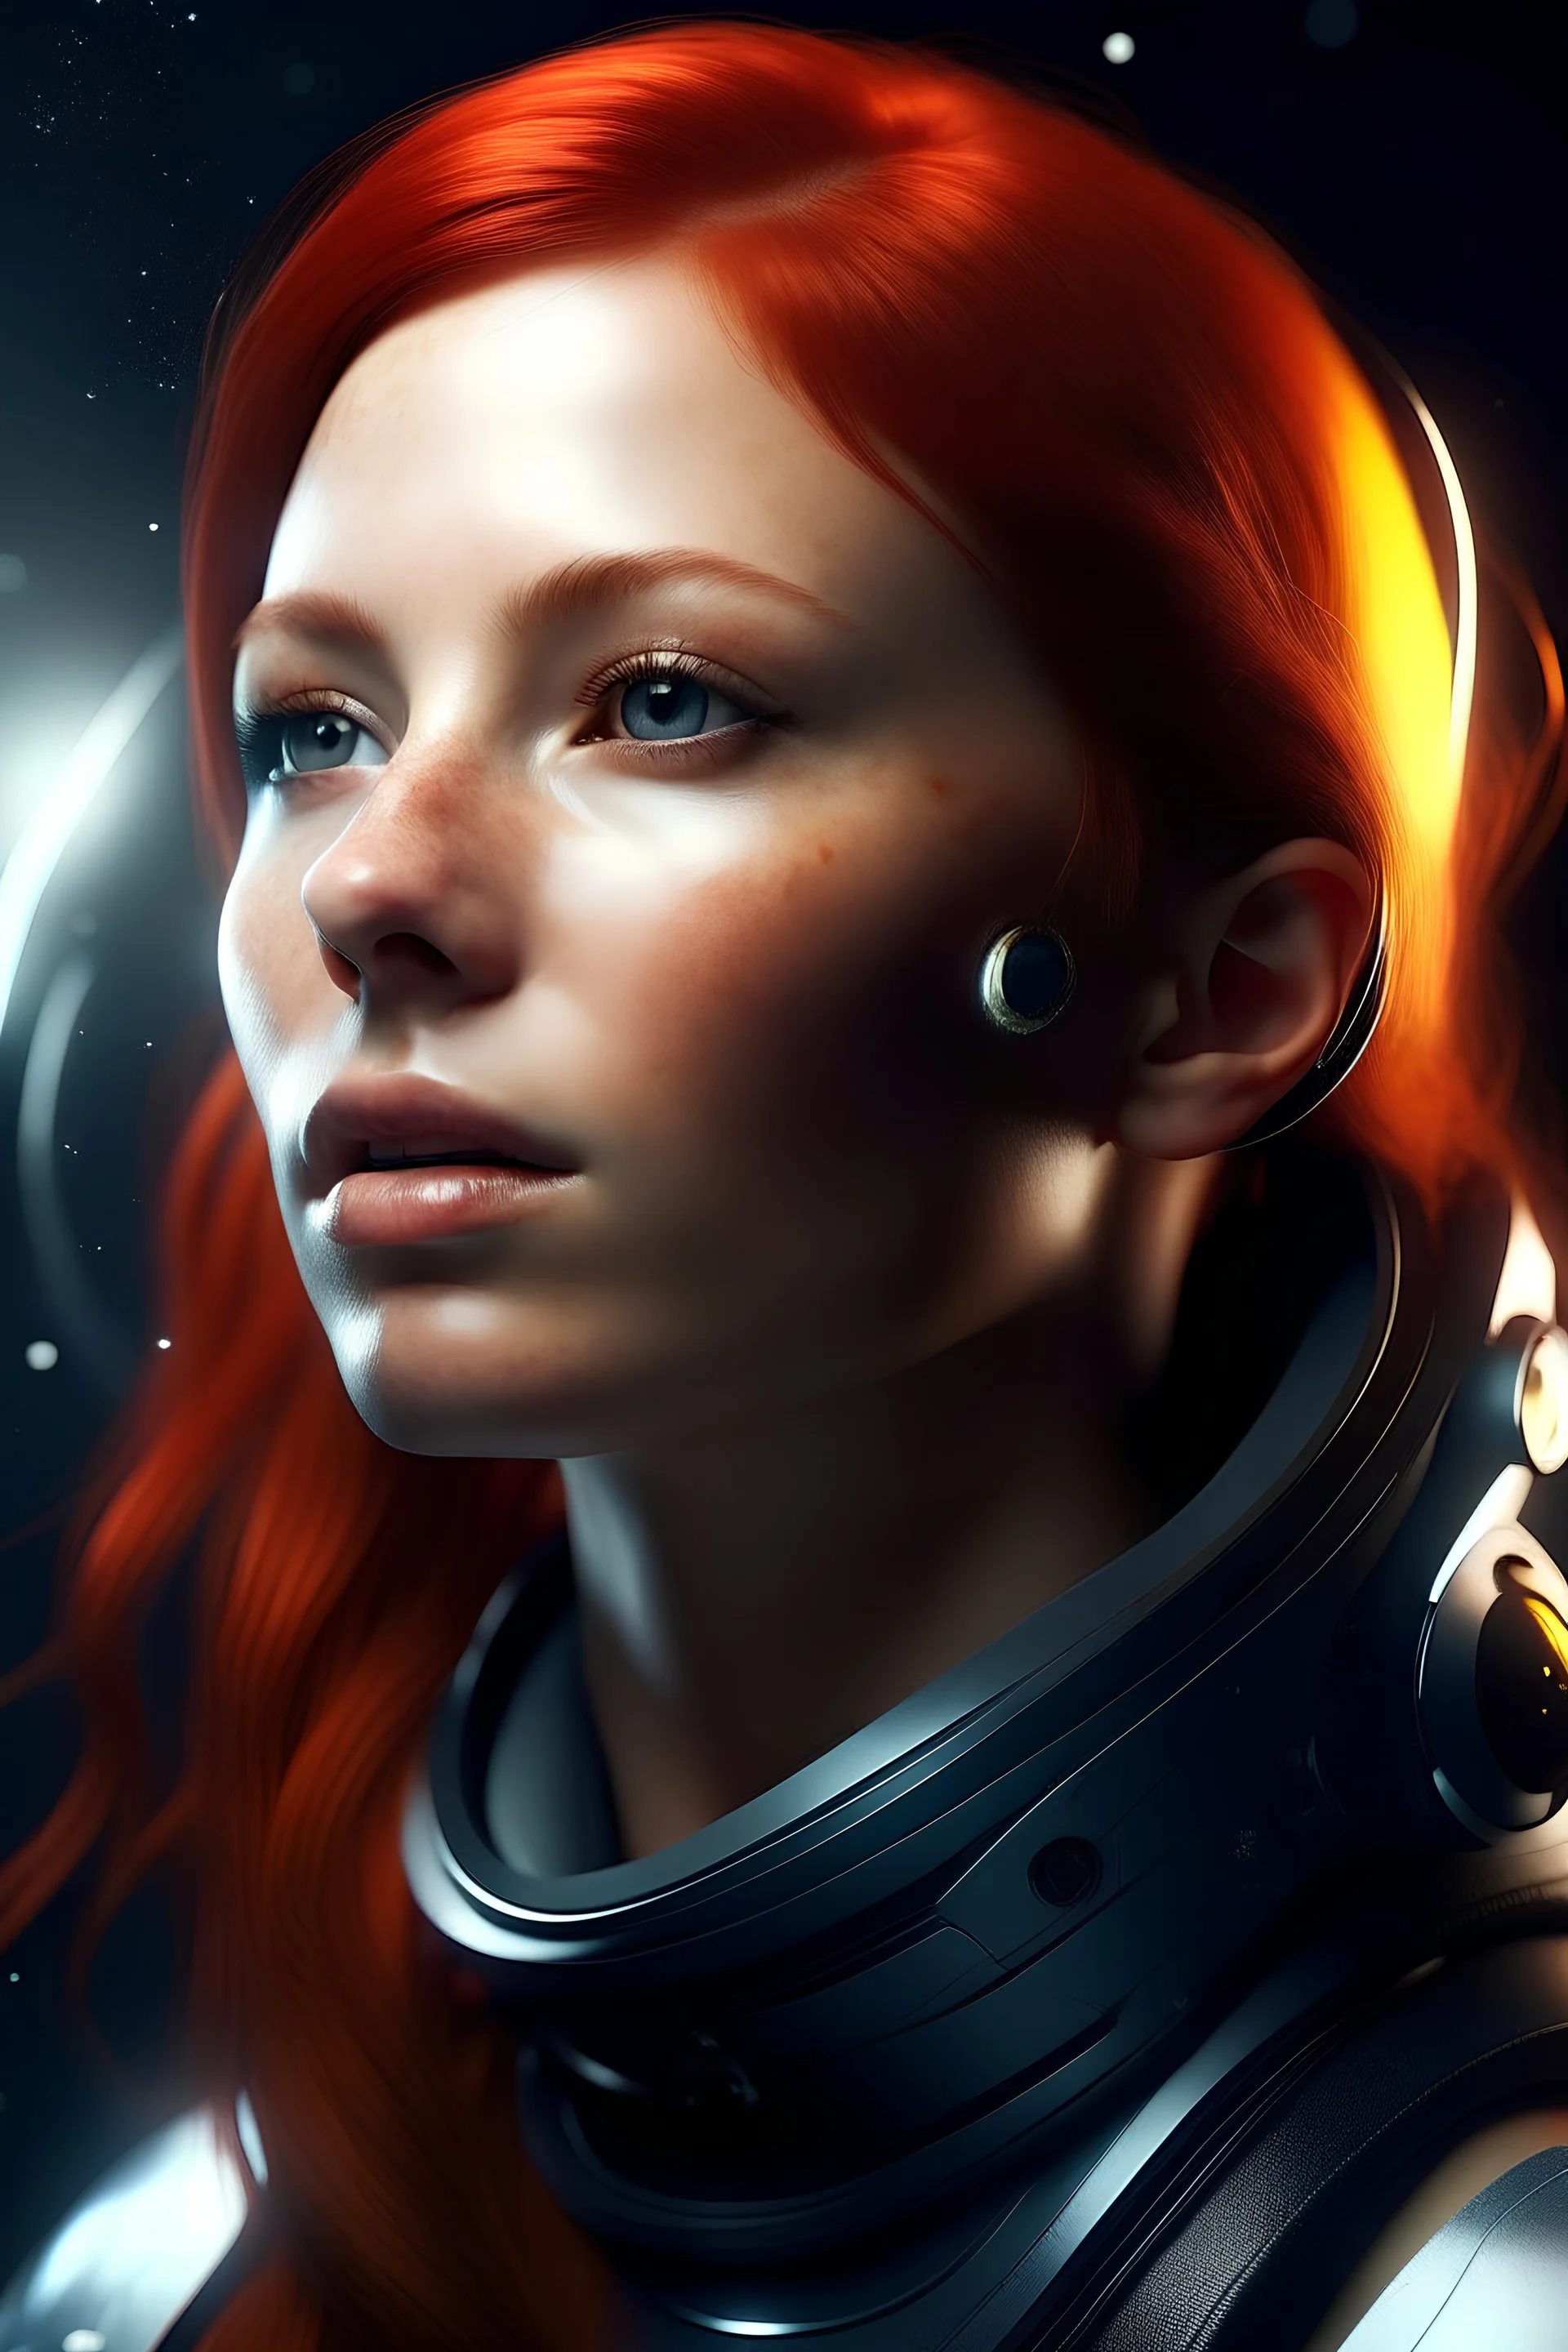 cosmos woman, redhair, photorealistic, wet skin, space uniform, tanned skin